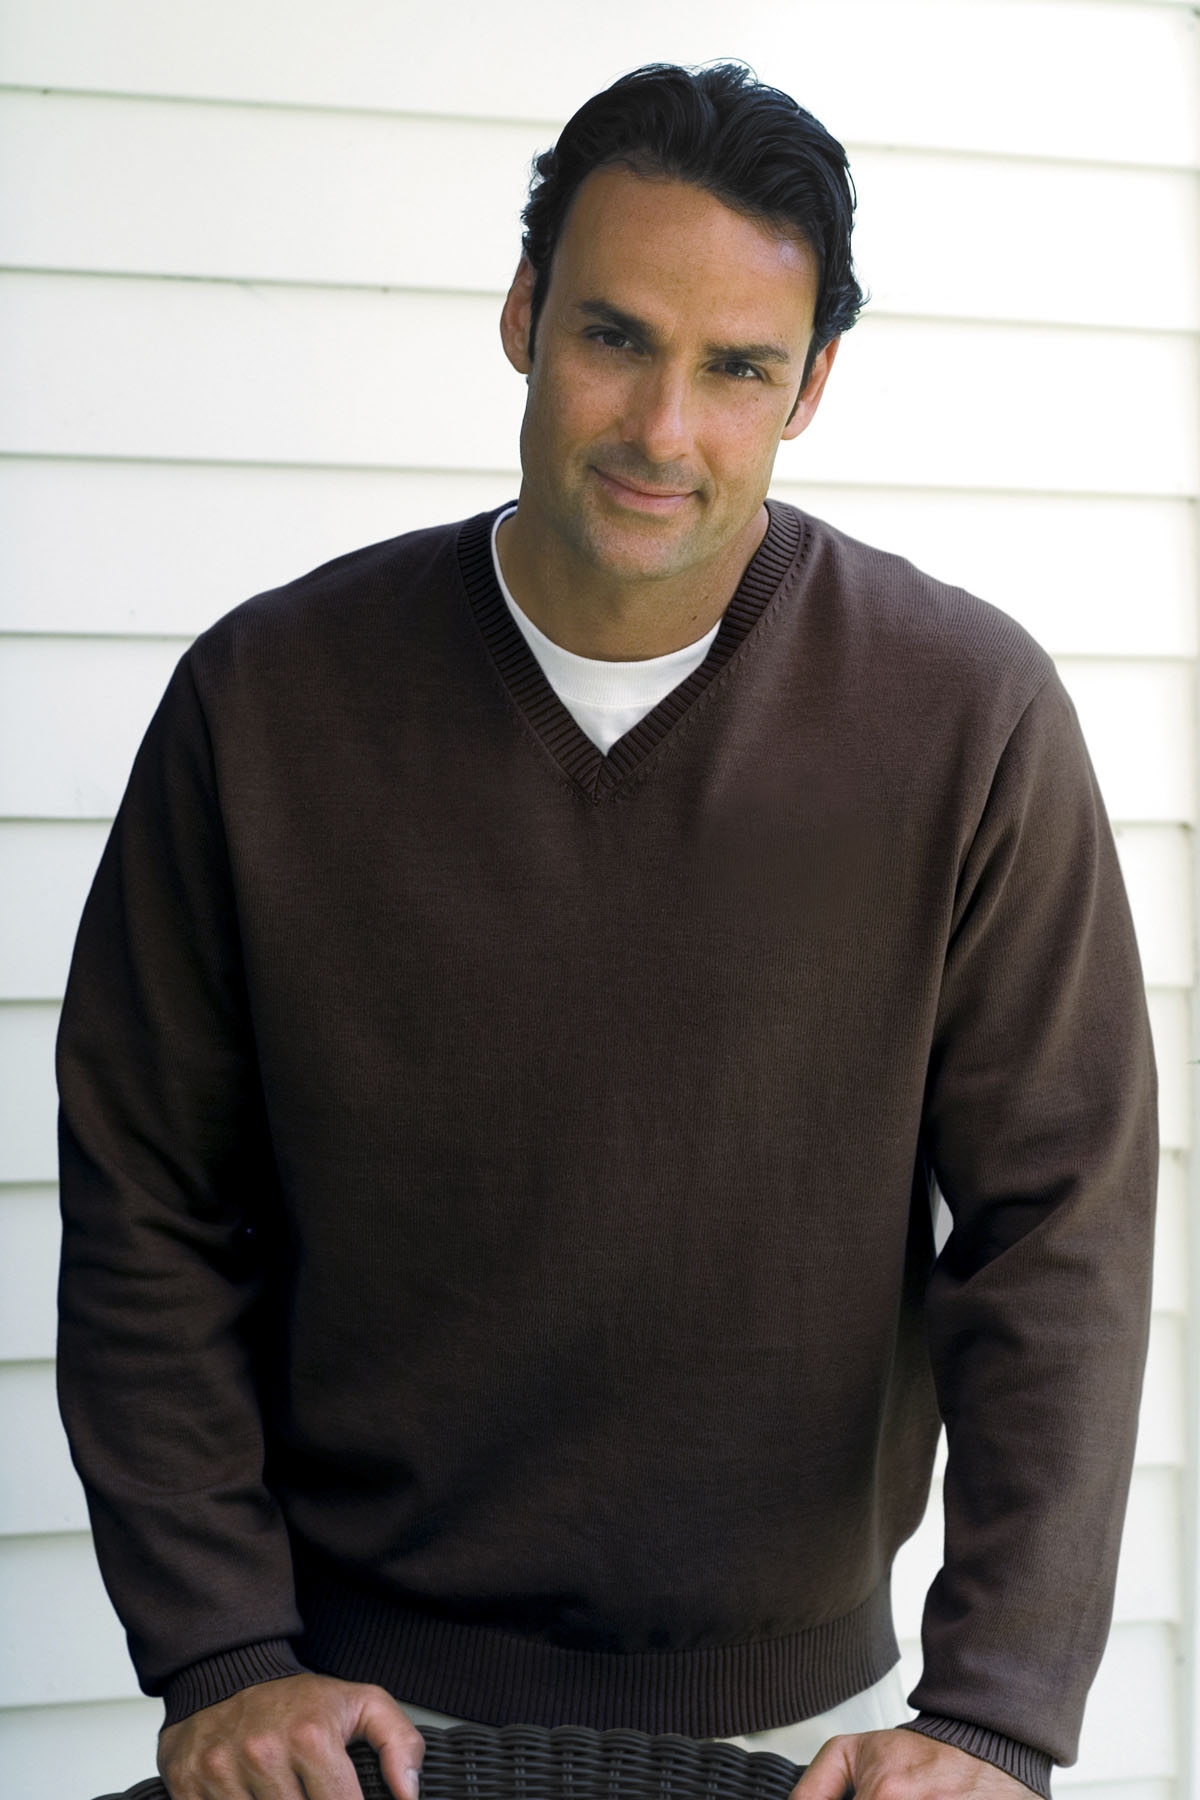 Vantage 9180 - Clubhouse V Neck Sweater